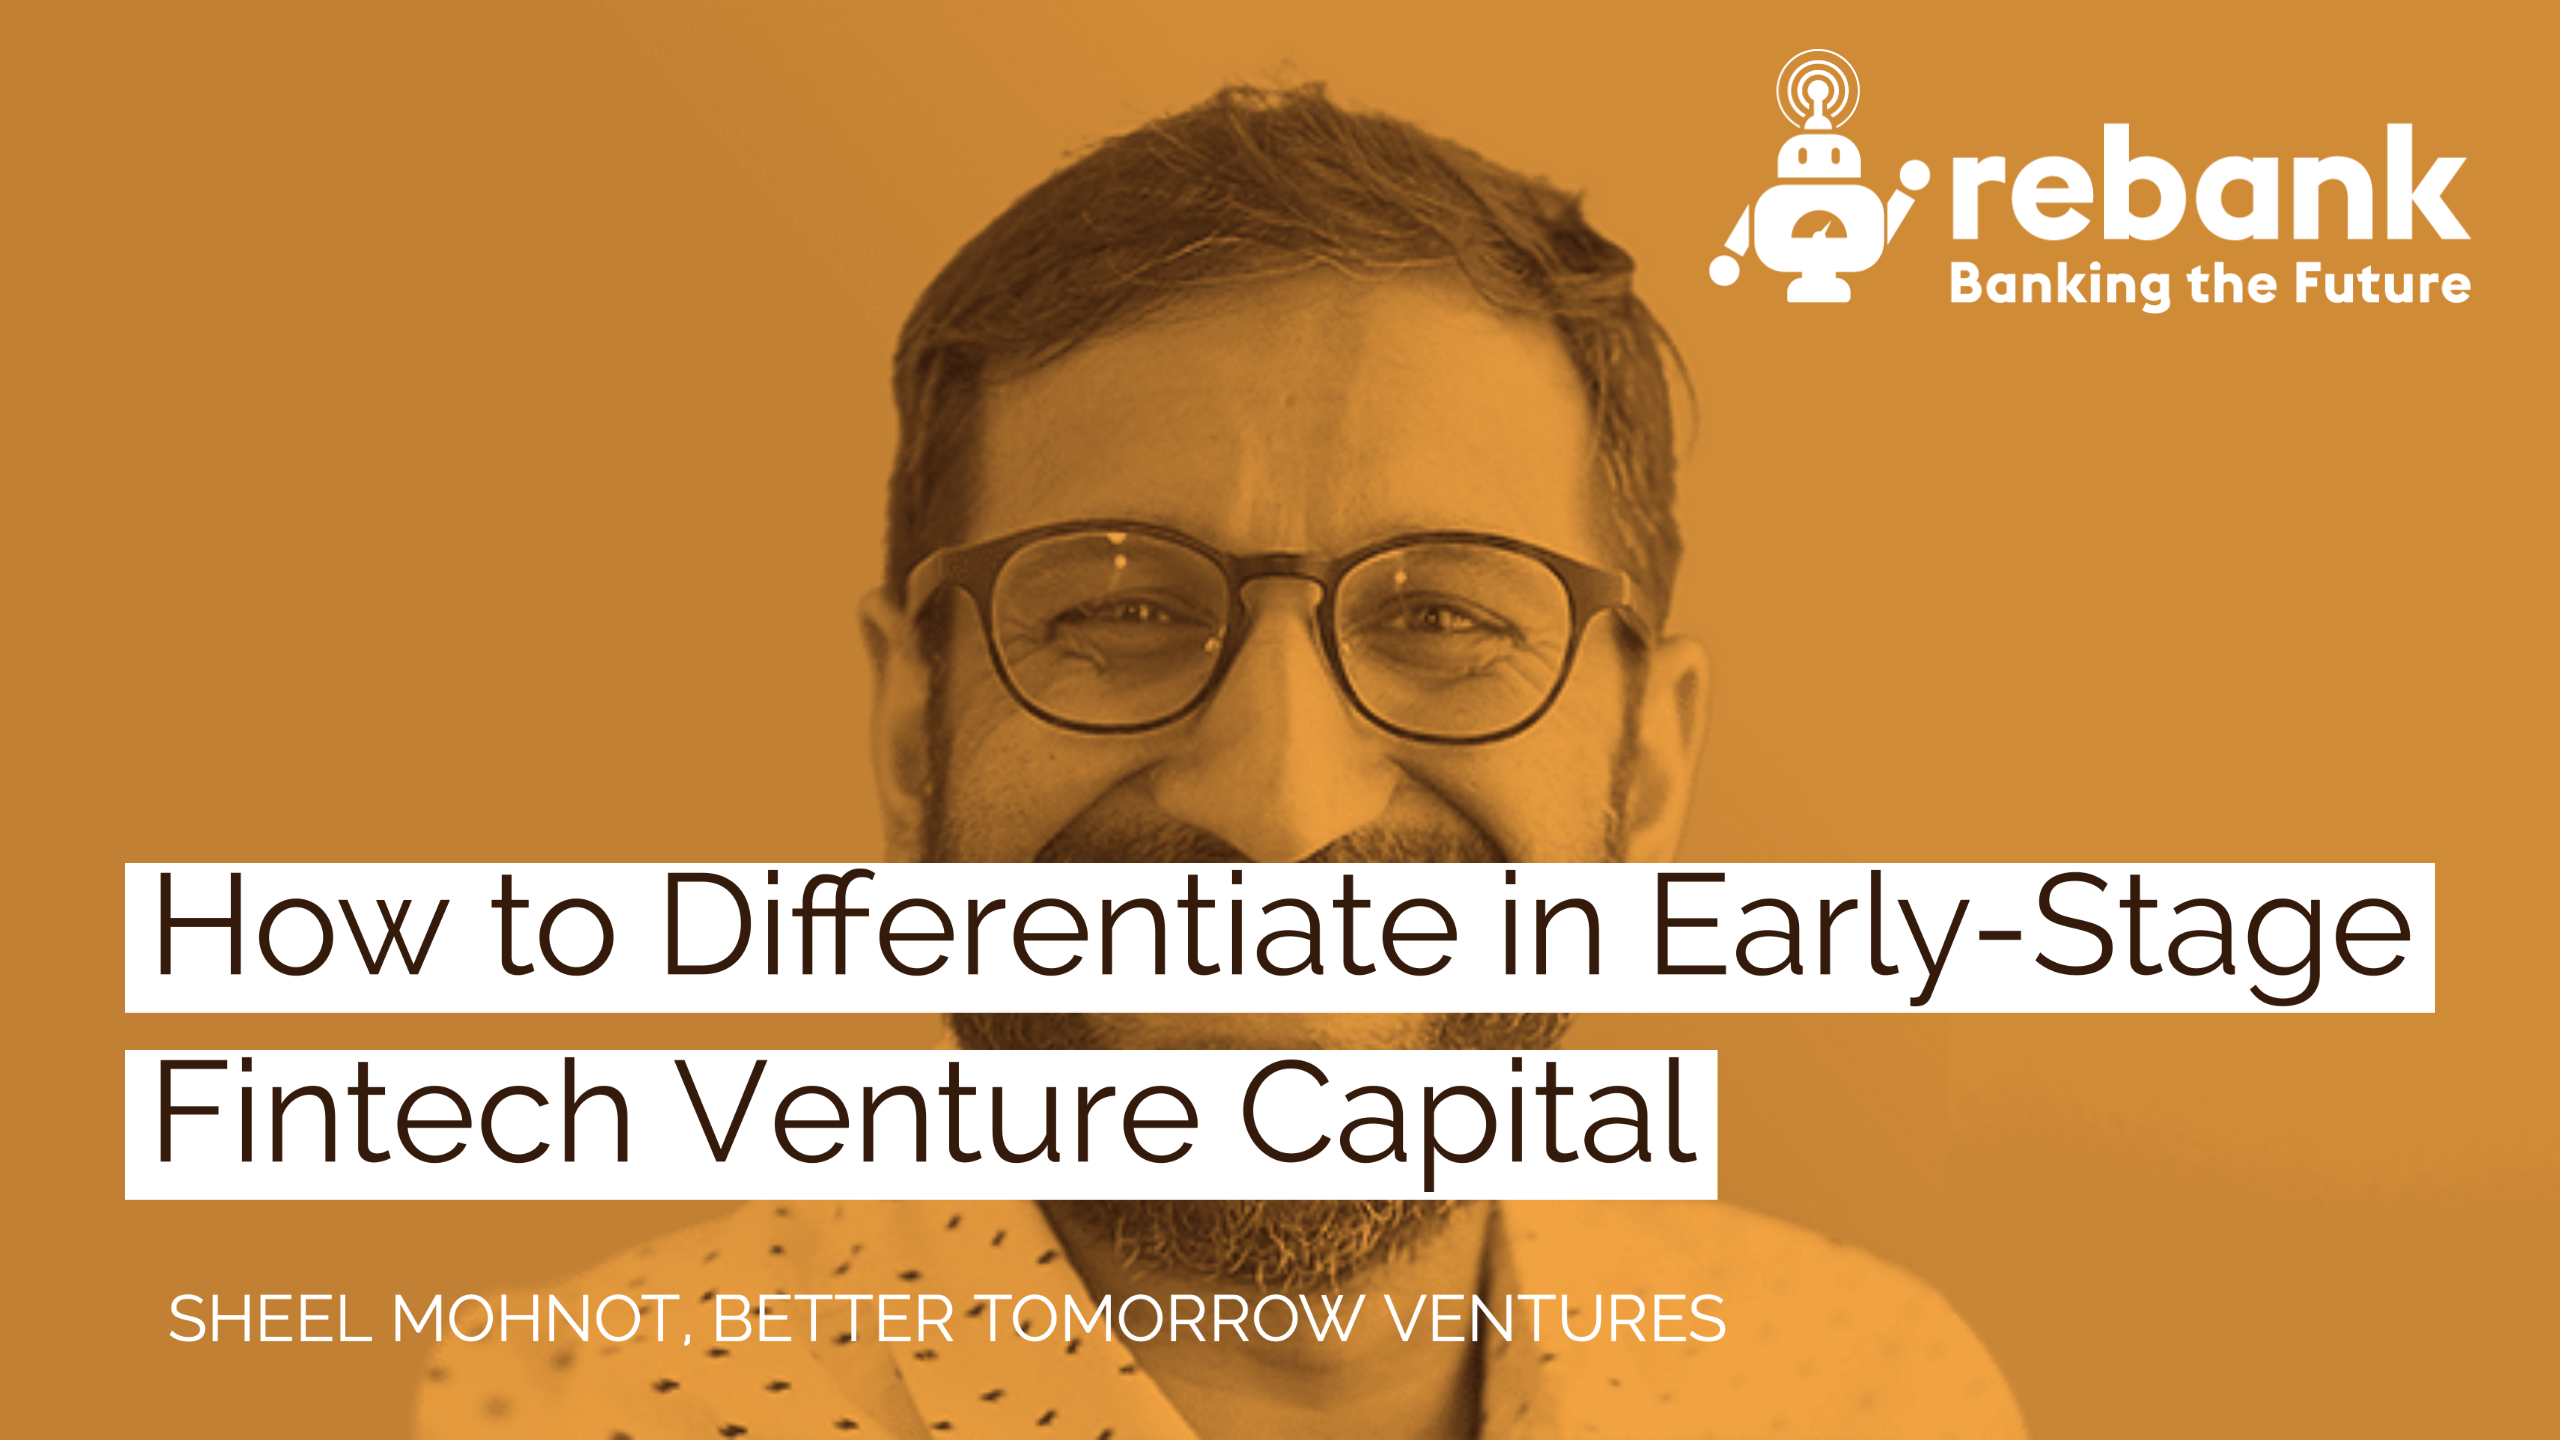 How to Differentiate in Early-Stage Fintech VC with Sheel Mohnot